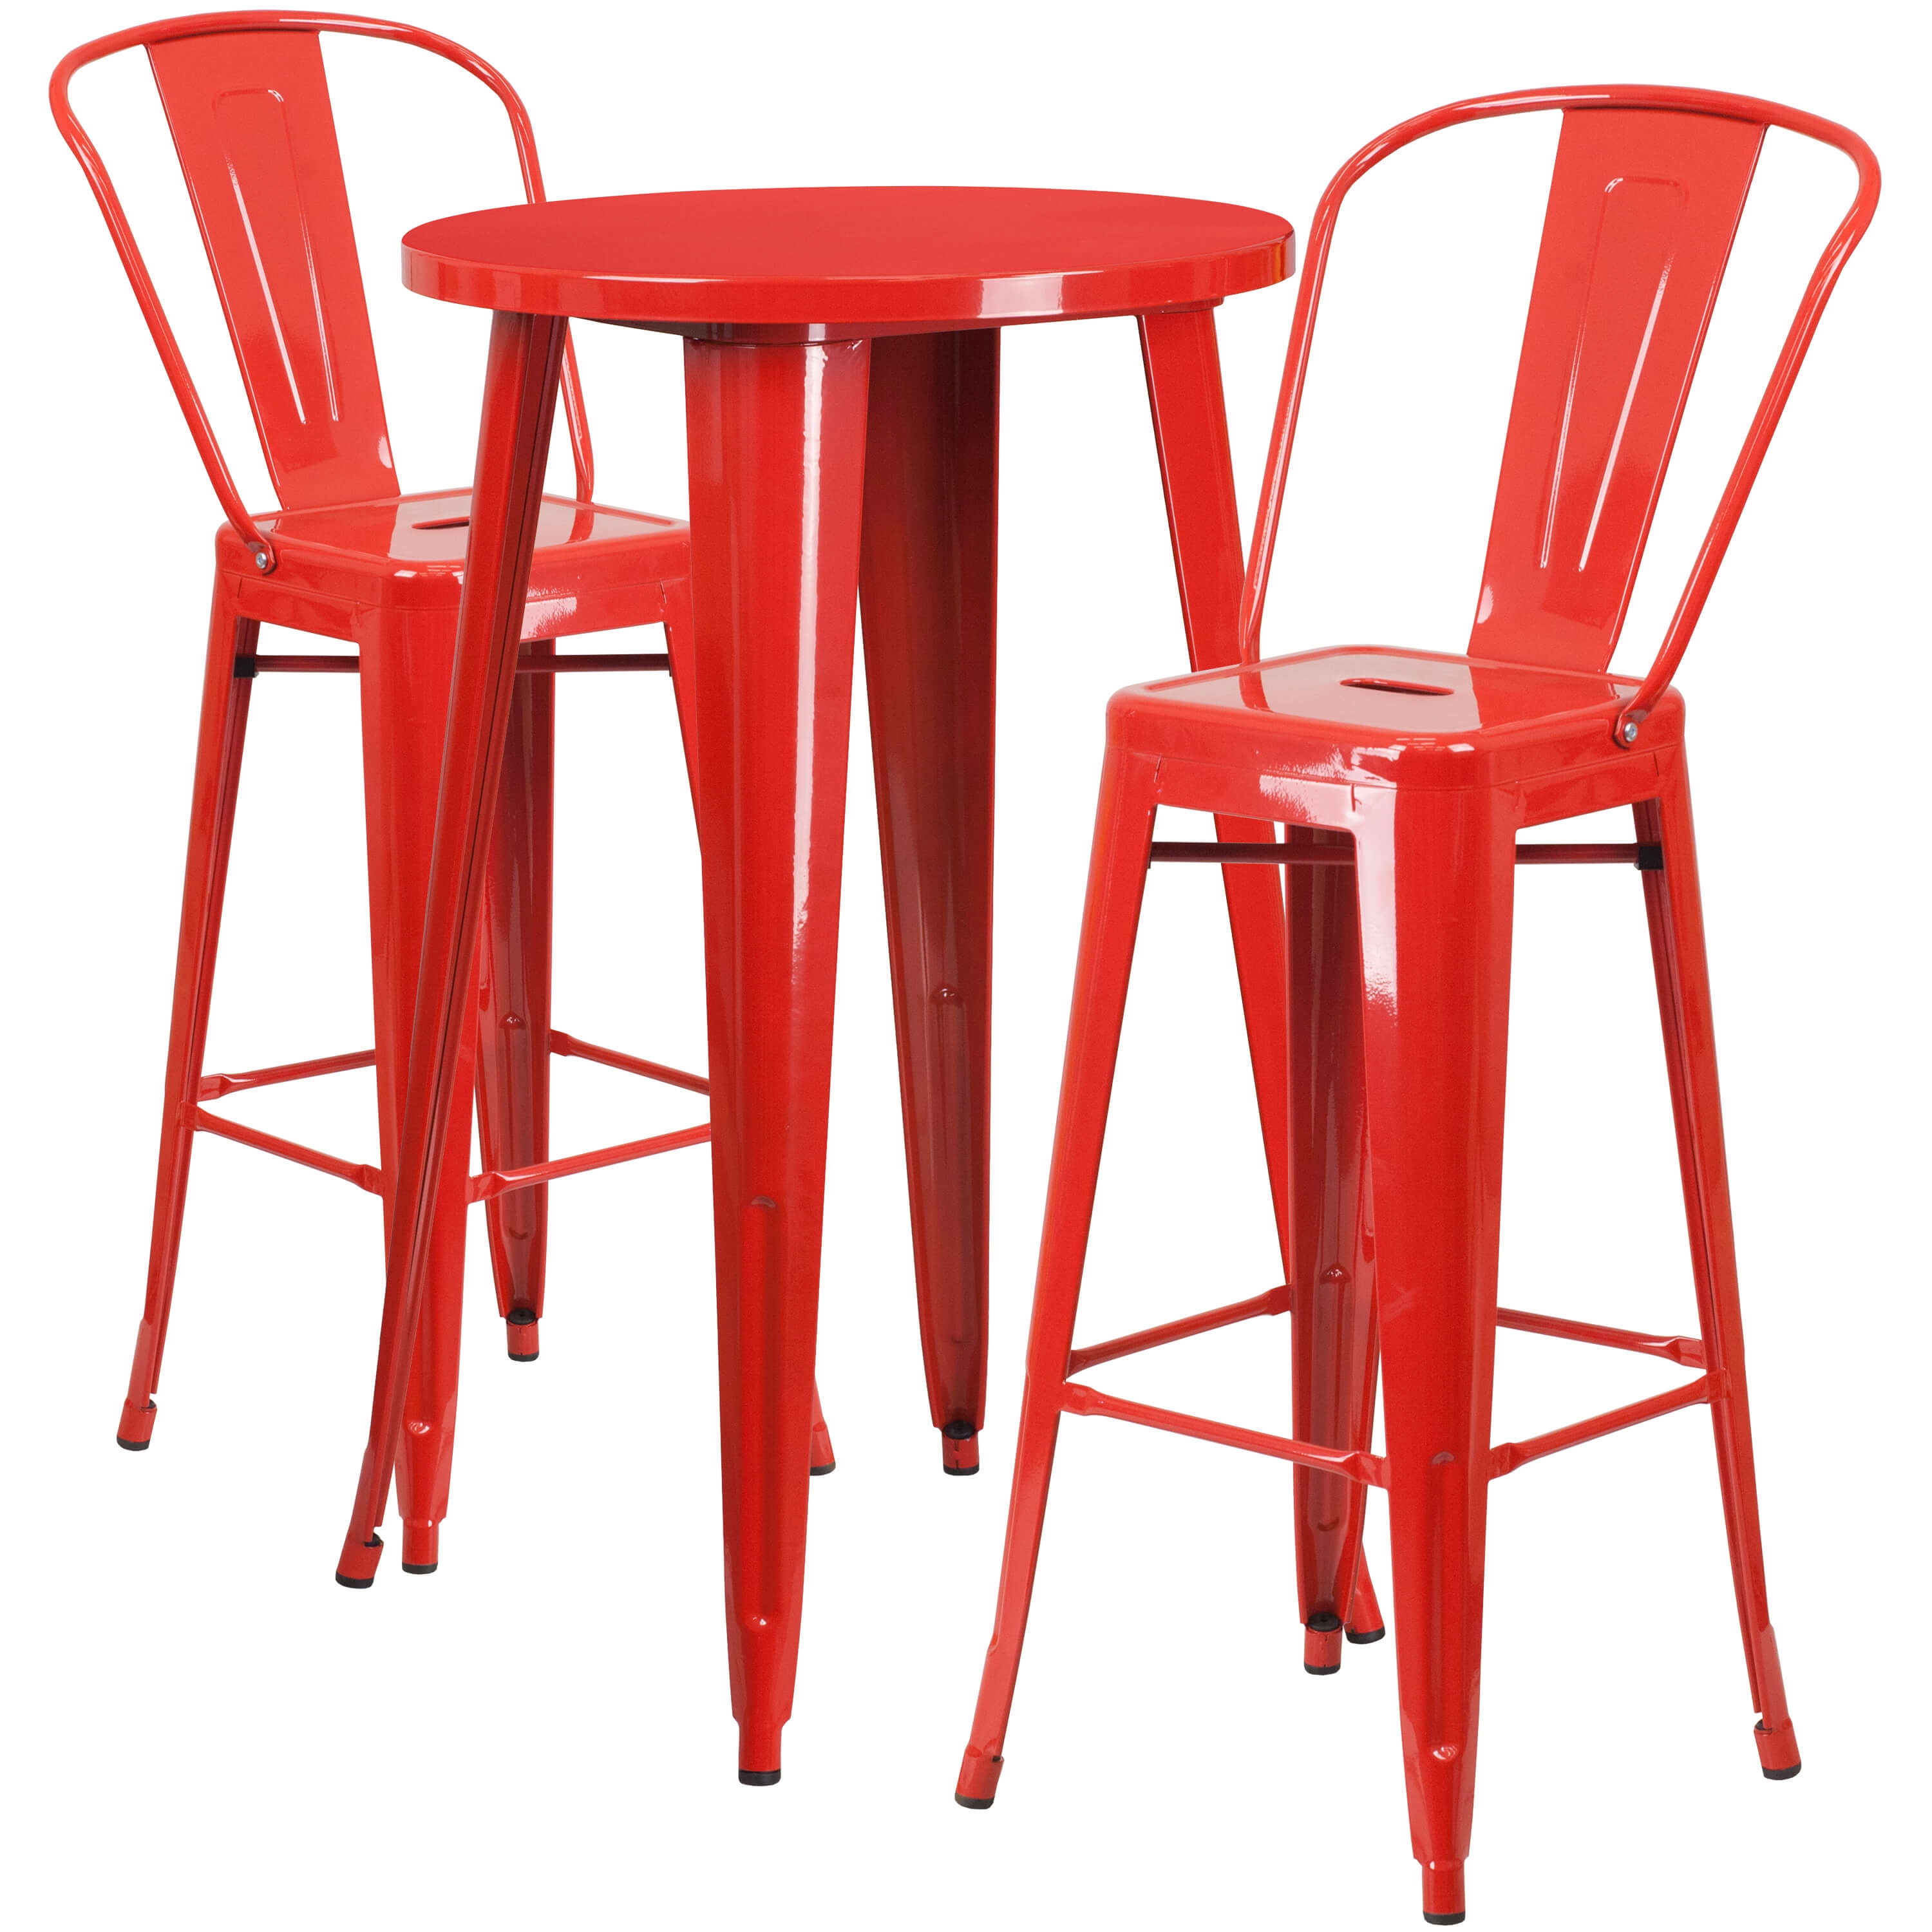 High top table set CUB CH 51080BH 2 30CAFE RED GG FLA